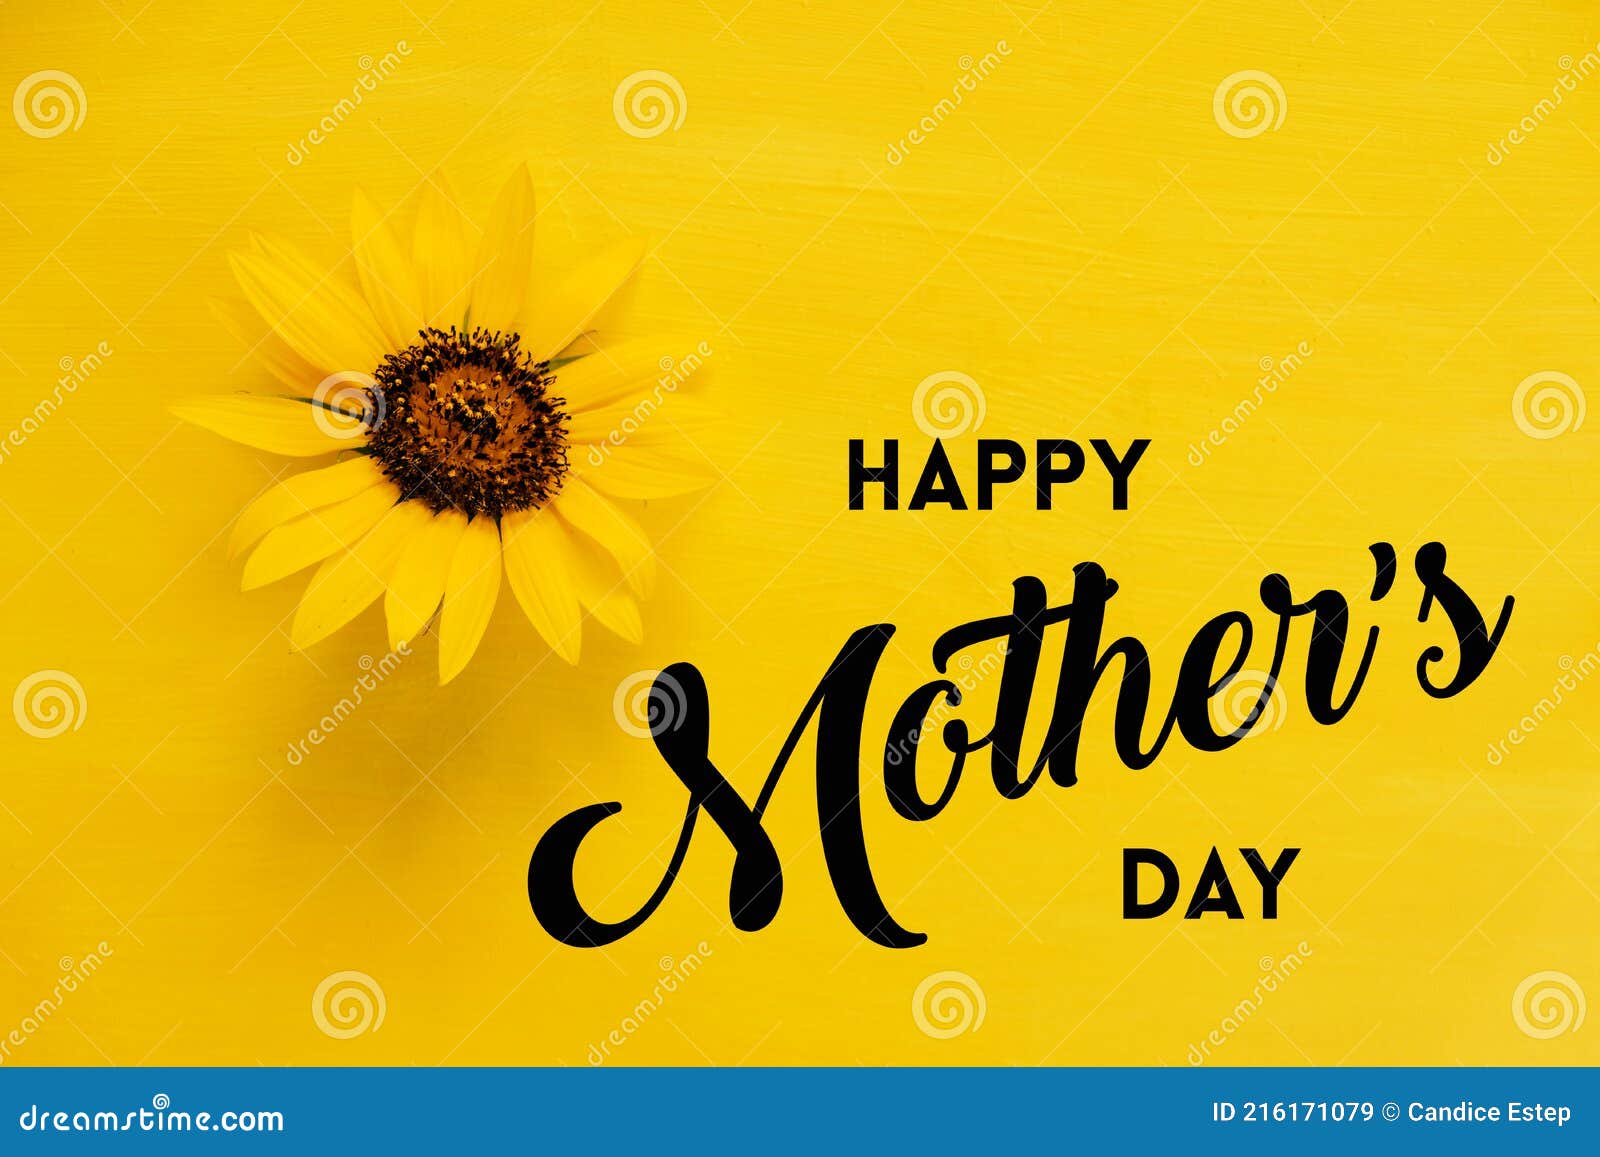 Happy Mothers Day Card with Sunflower on Monochrome Yellow Background ...